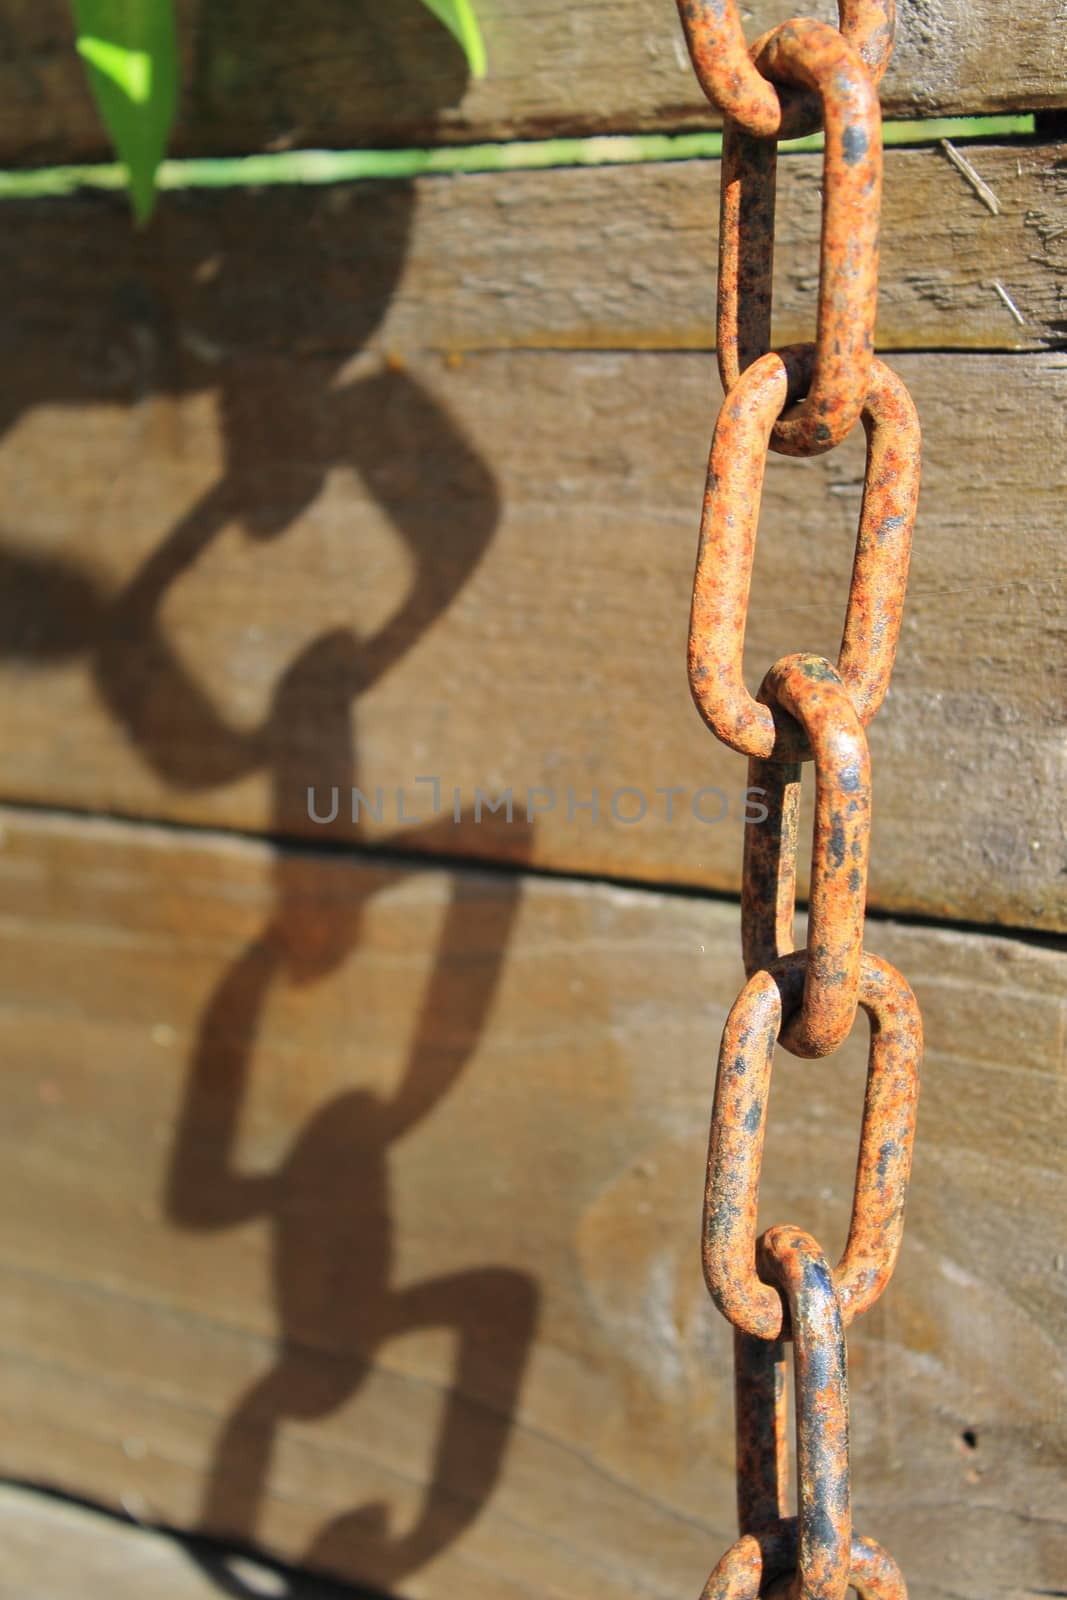 Image of a chain hanging, rusting, with shadow contrast